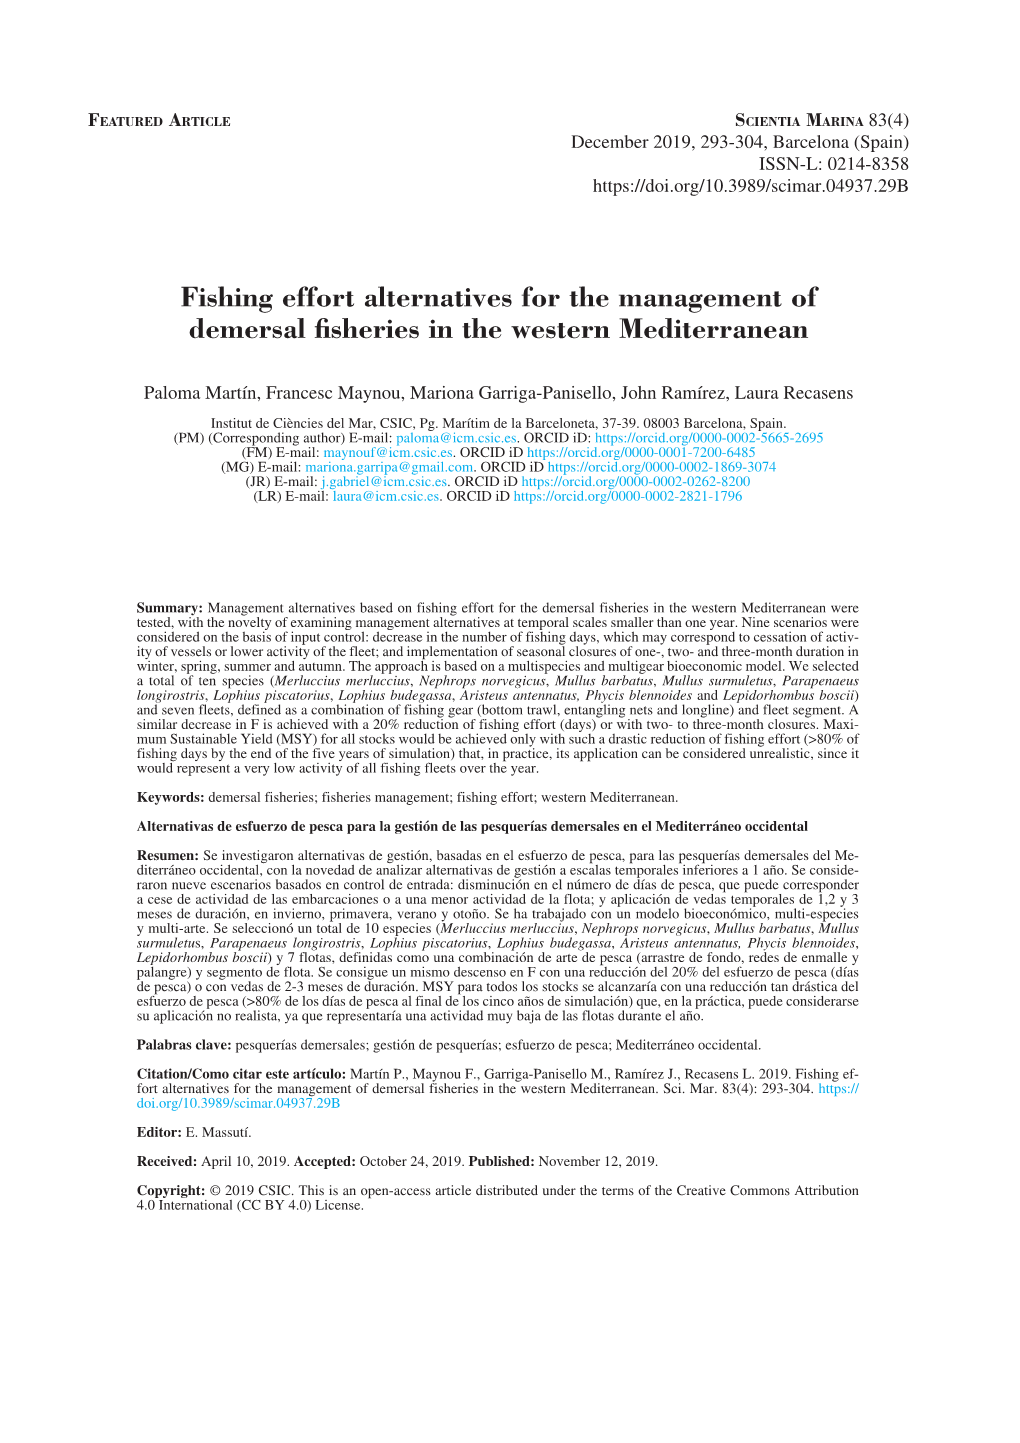 Fishing Effort Alternatives for the Management of Demersal Fisheries